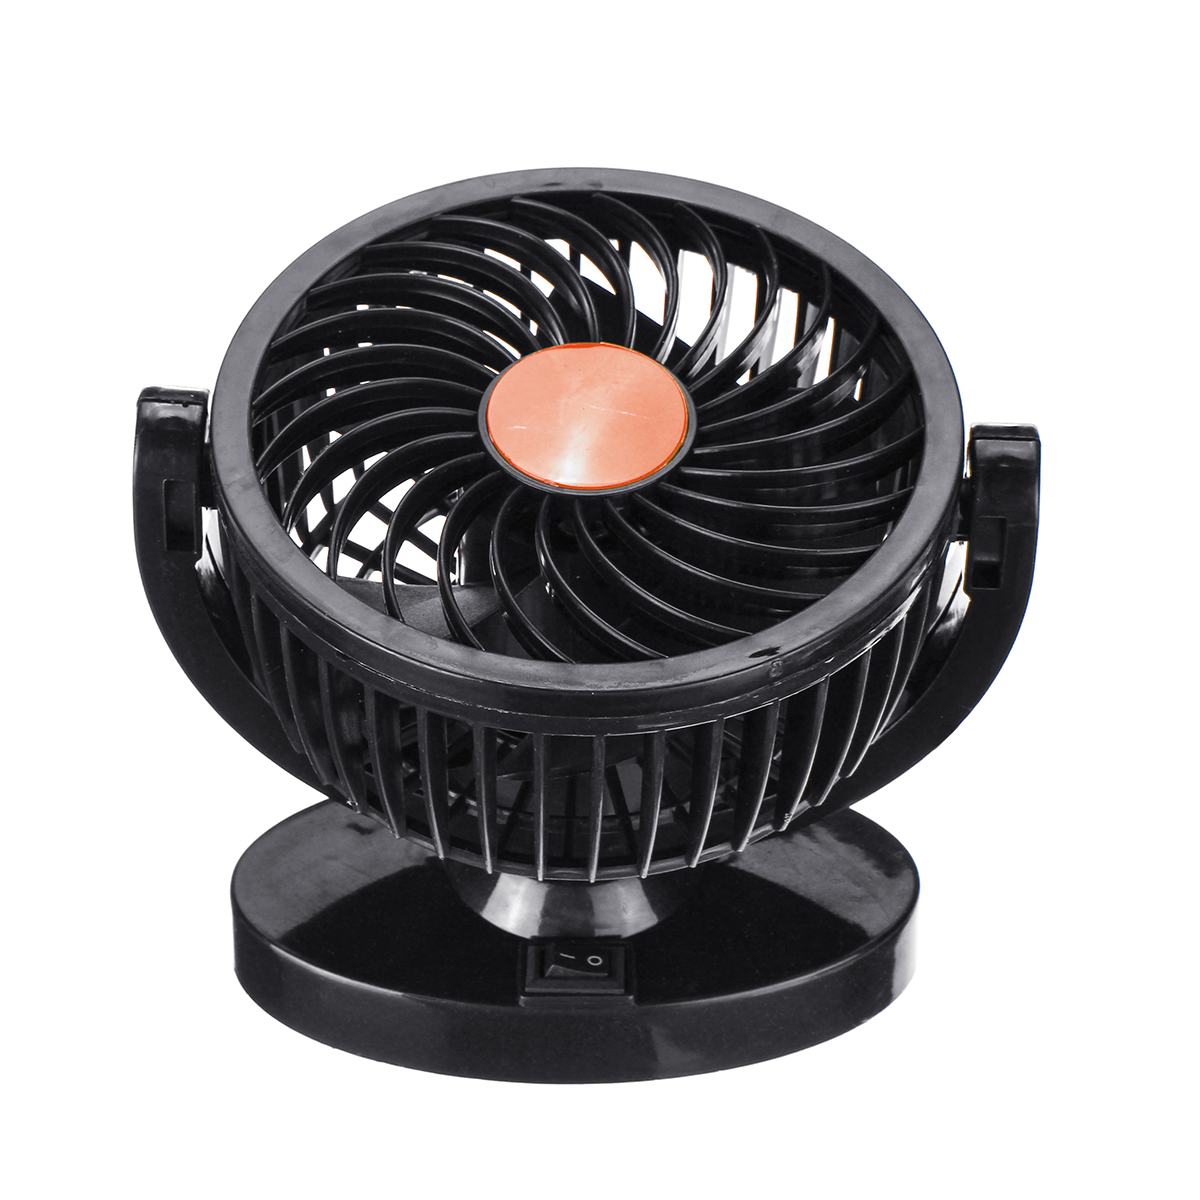 DC-12V24V-360deg-All-Round-Mini-Auto-Air-Cooling-Fan-Adjustable-Low-Noise-1466573-9